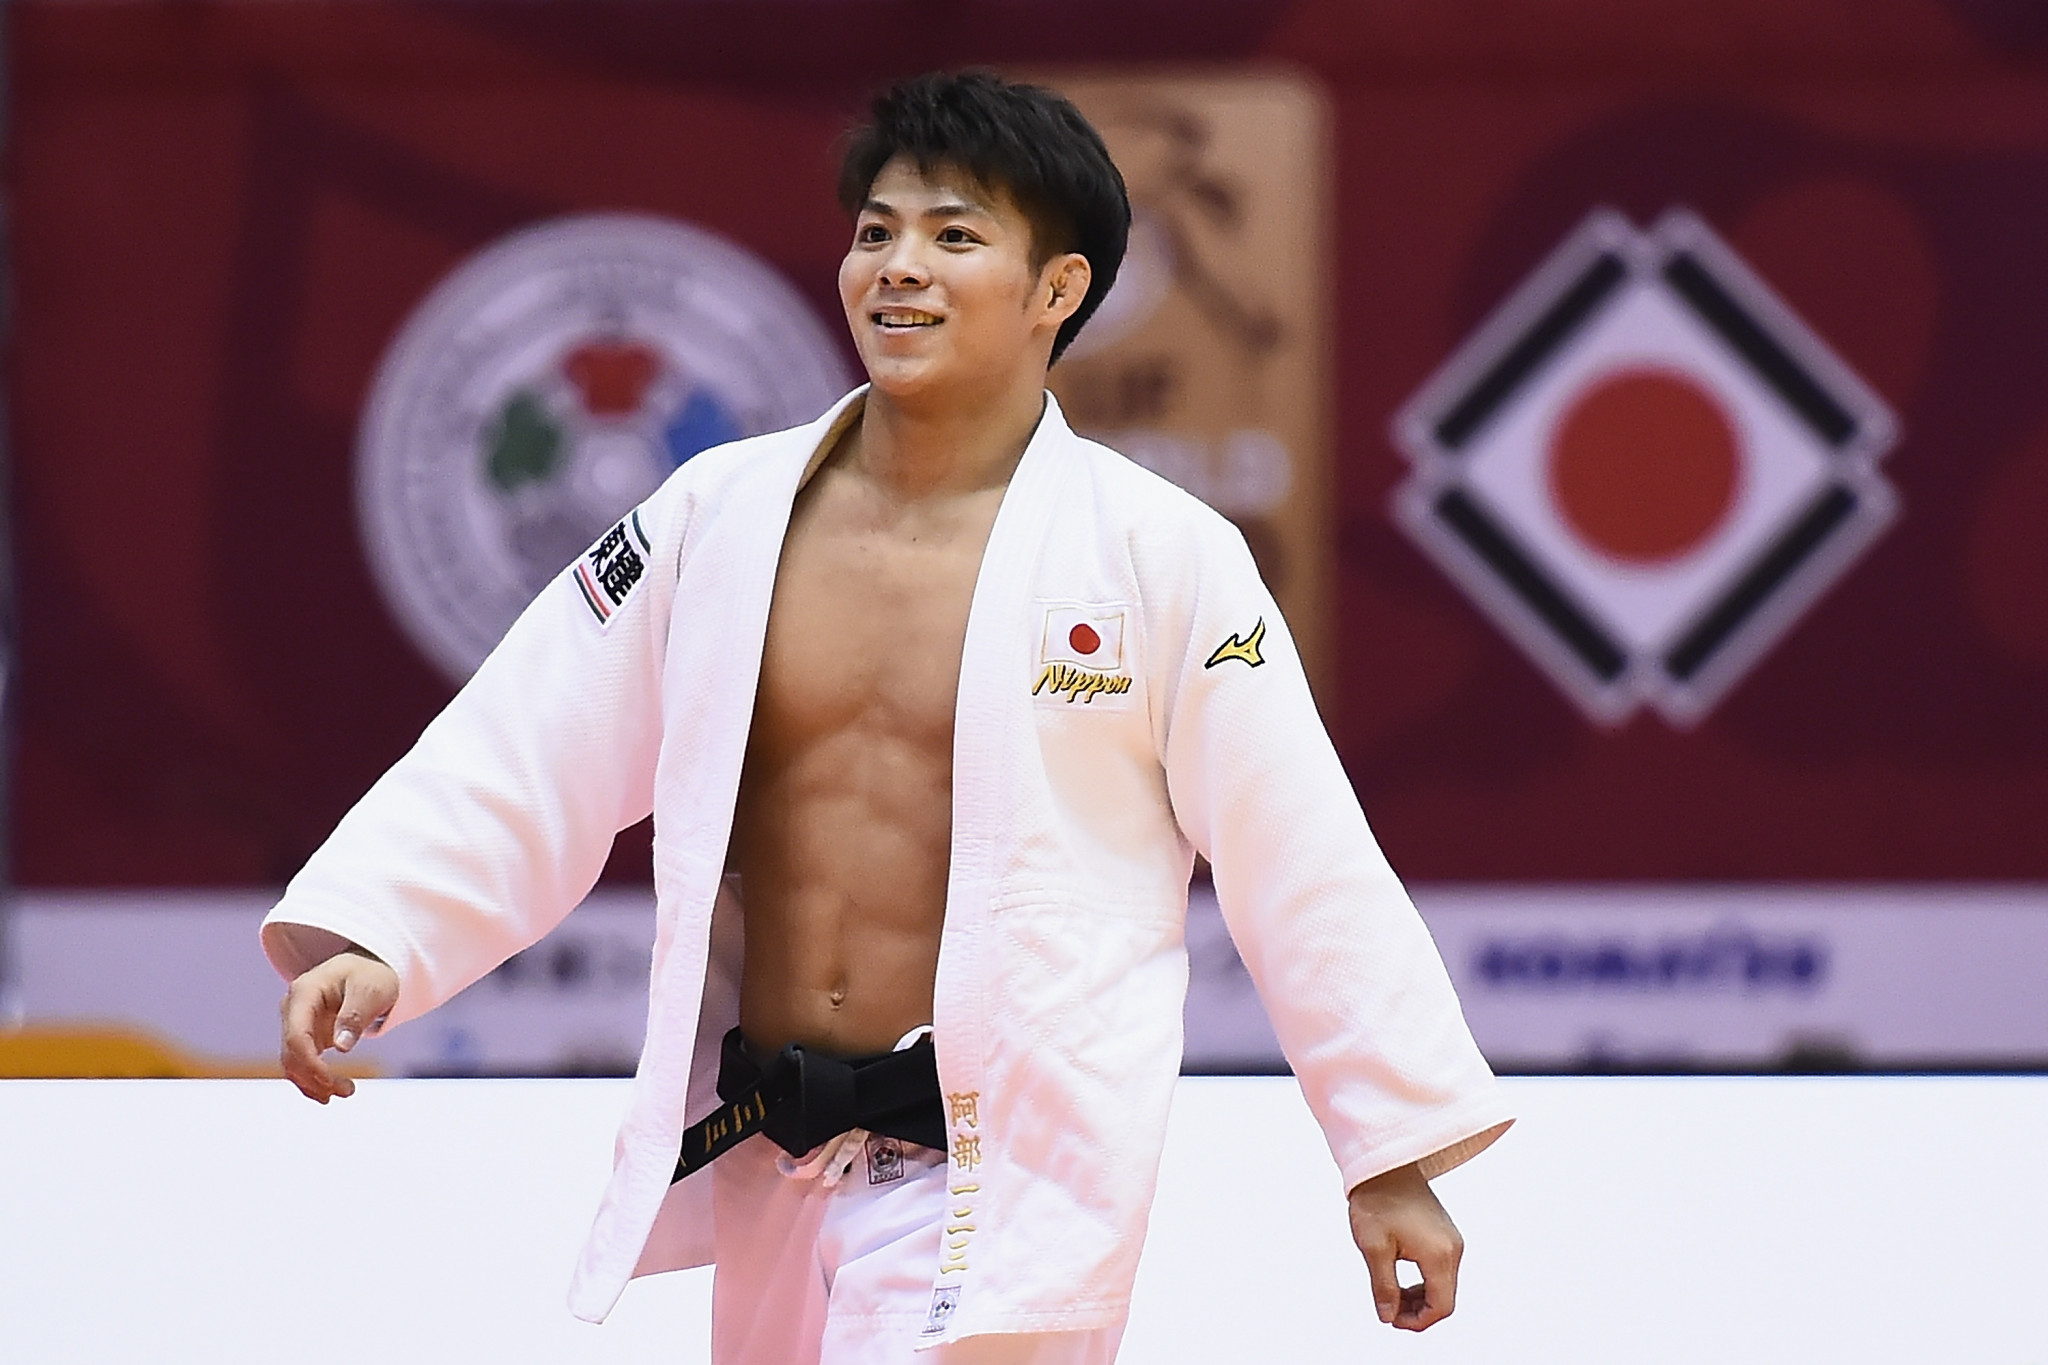 Hifumi Abe earned the gold medal in the men's under-66kg division ©Getty Images